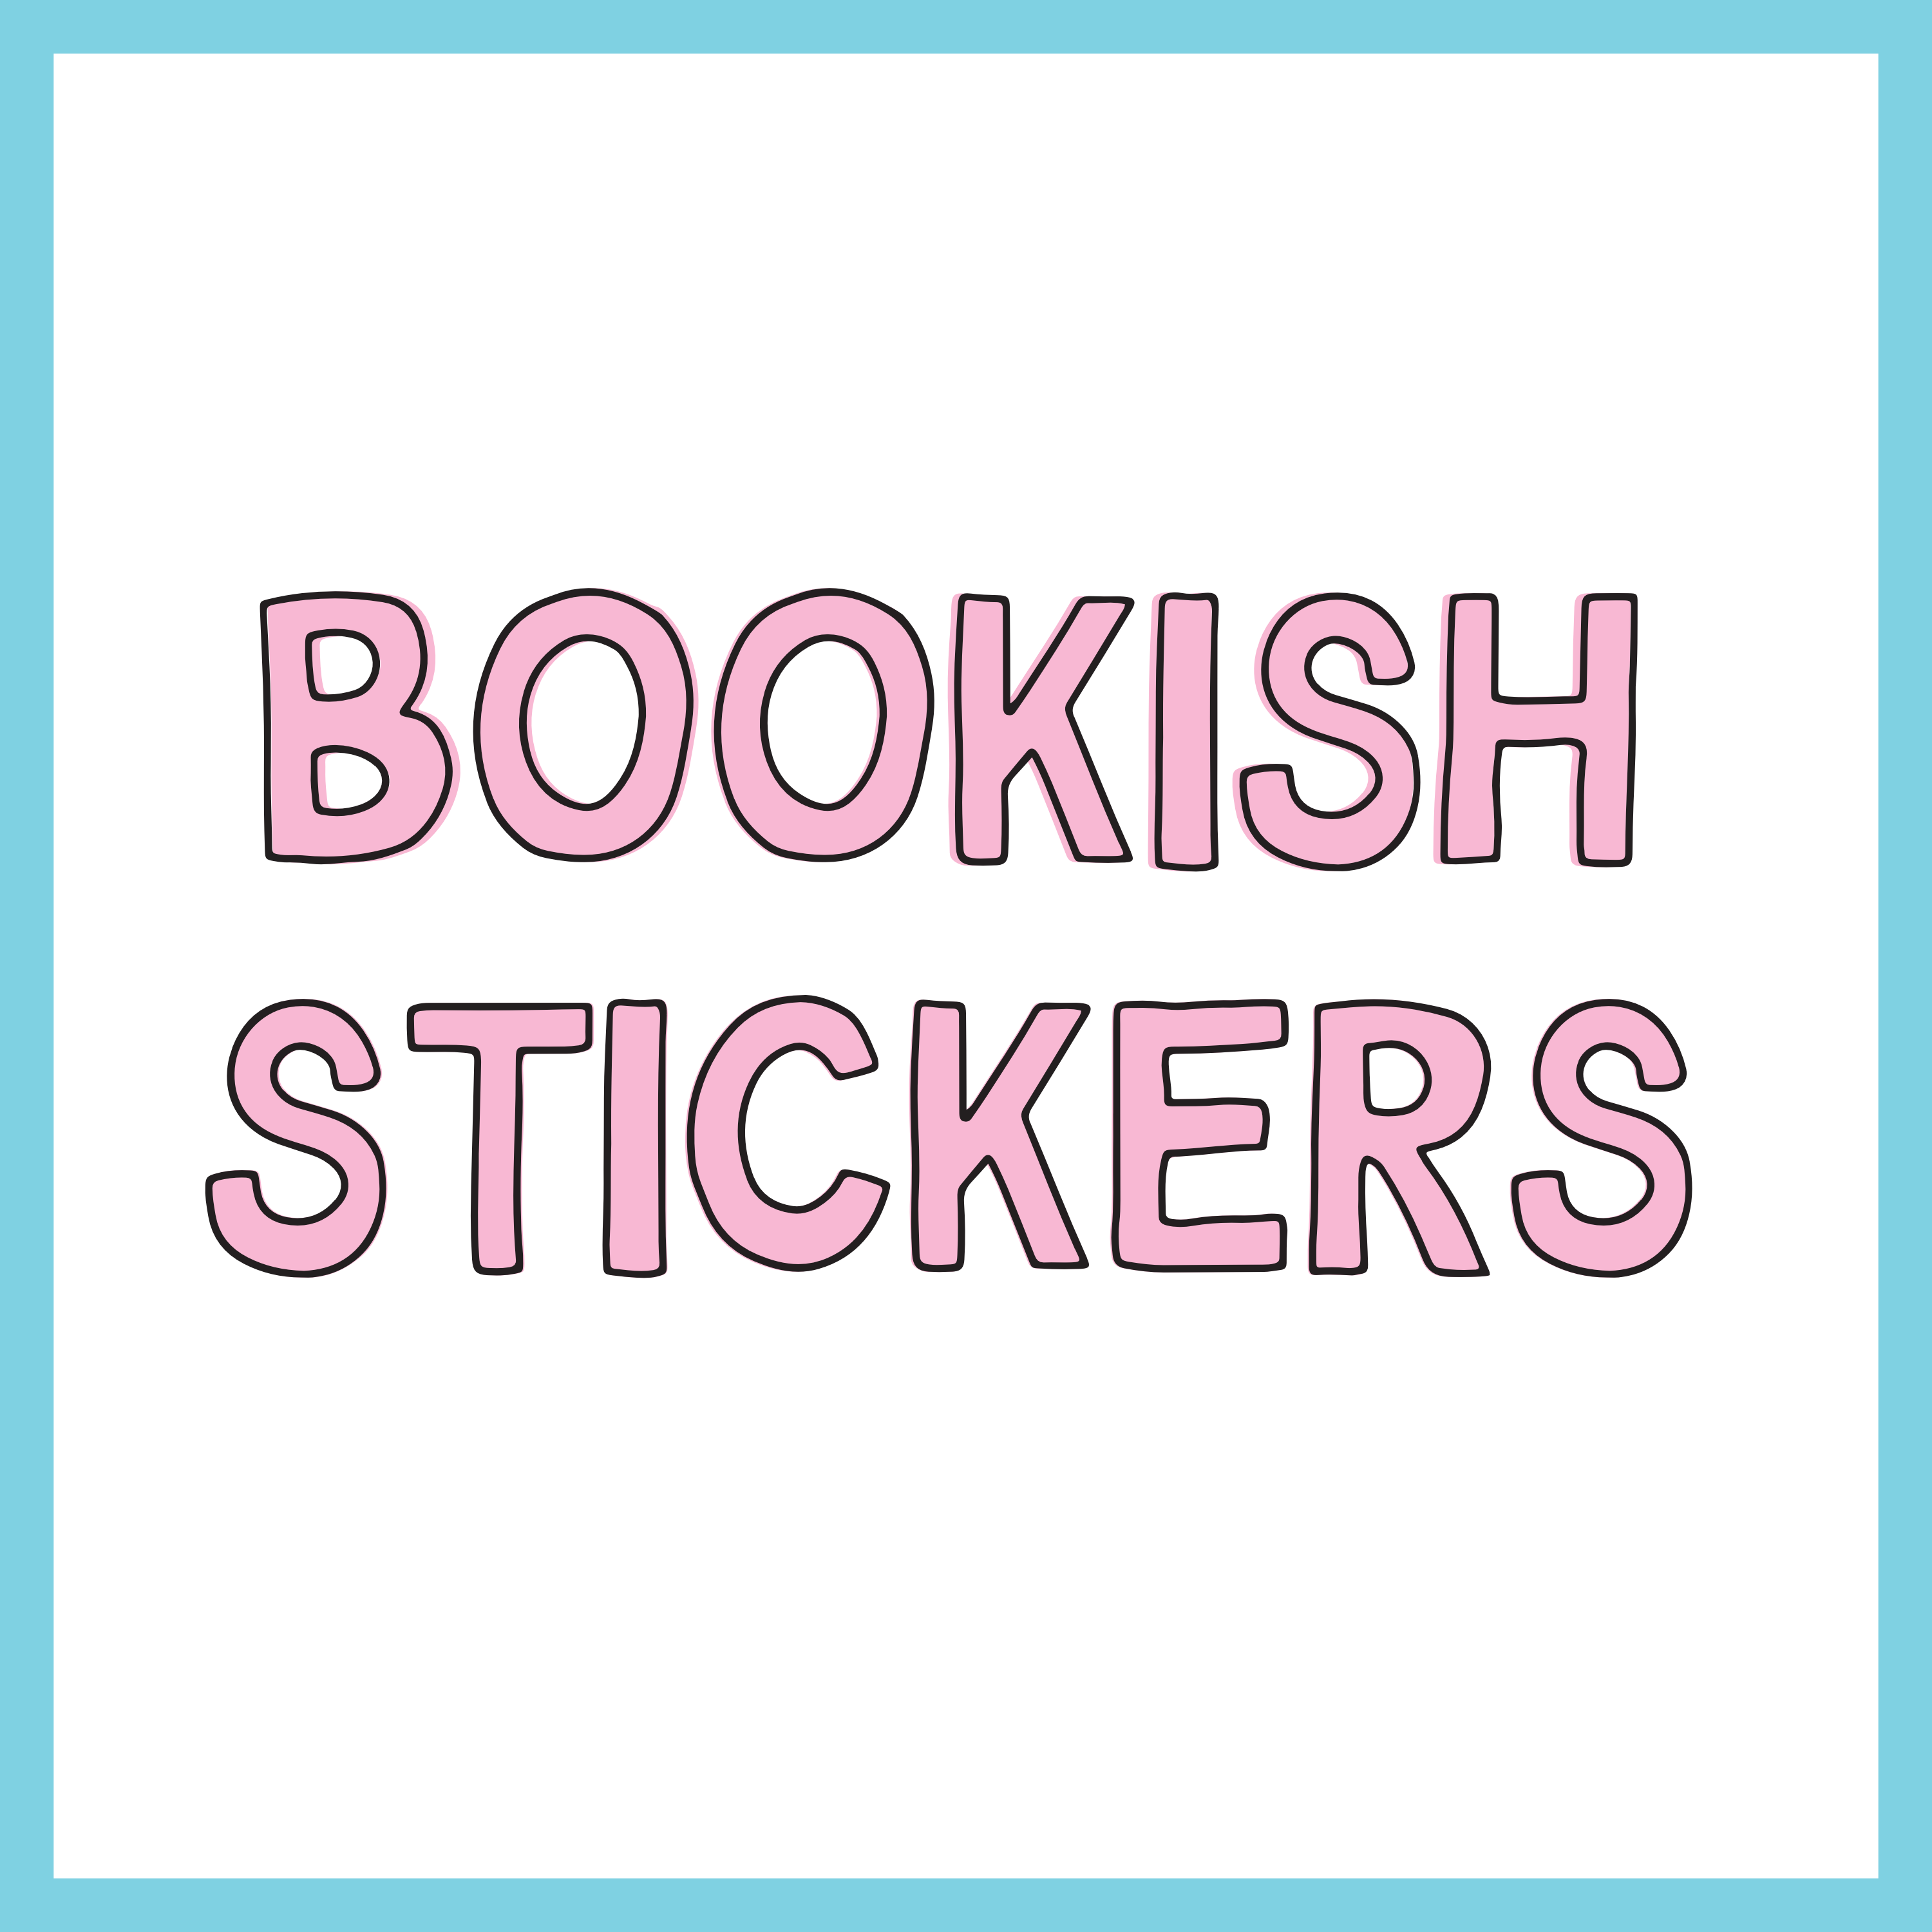 Book Lovers Planner Stickers, Reading Log Stickers, Bibliophile Planner  Sticker Kit, Books & Beans Deco Stickers